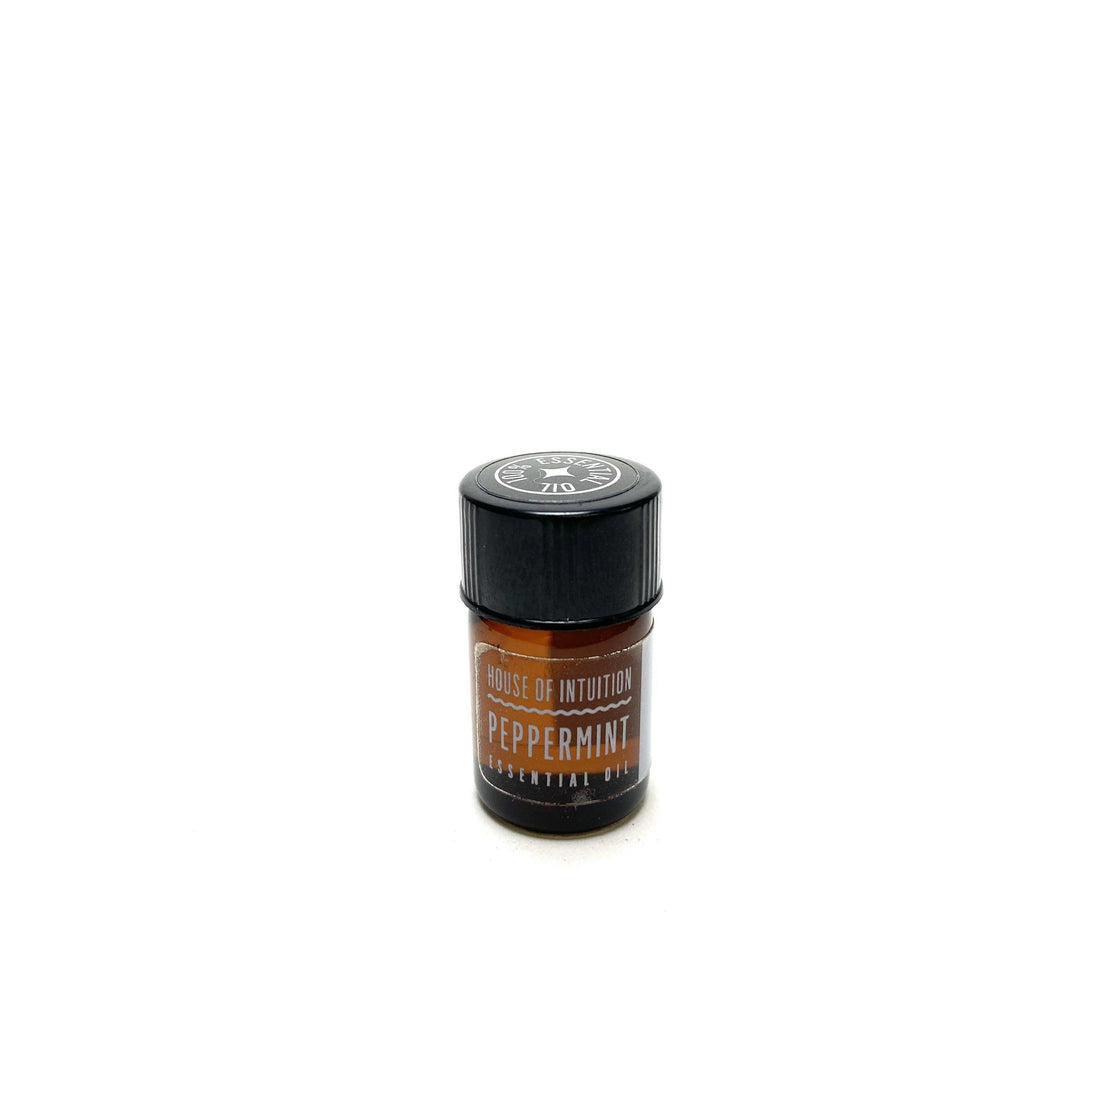 Peppermint Essential Oil Essential Oils House of Intuition 5/8 ml 